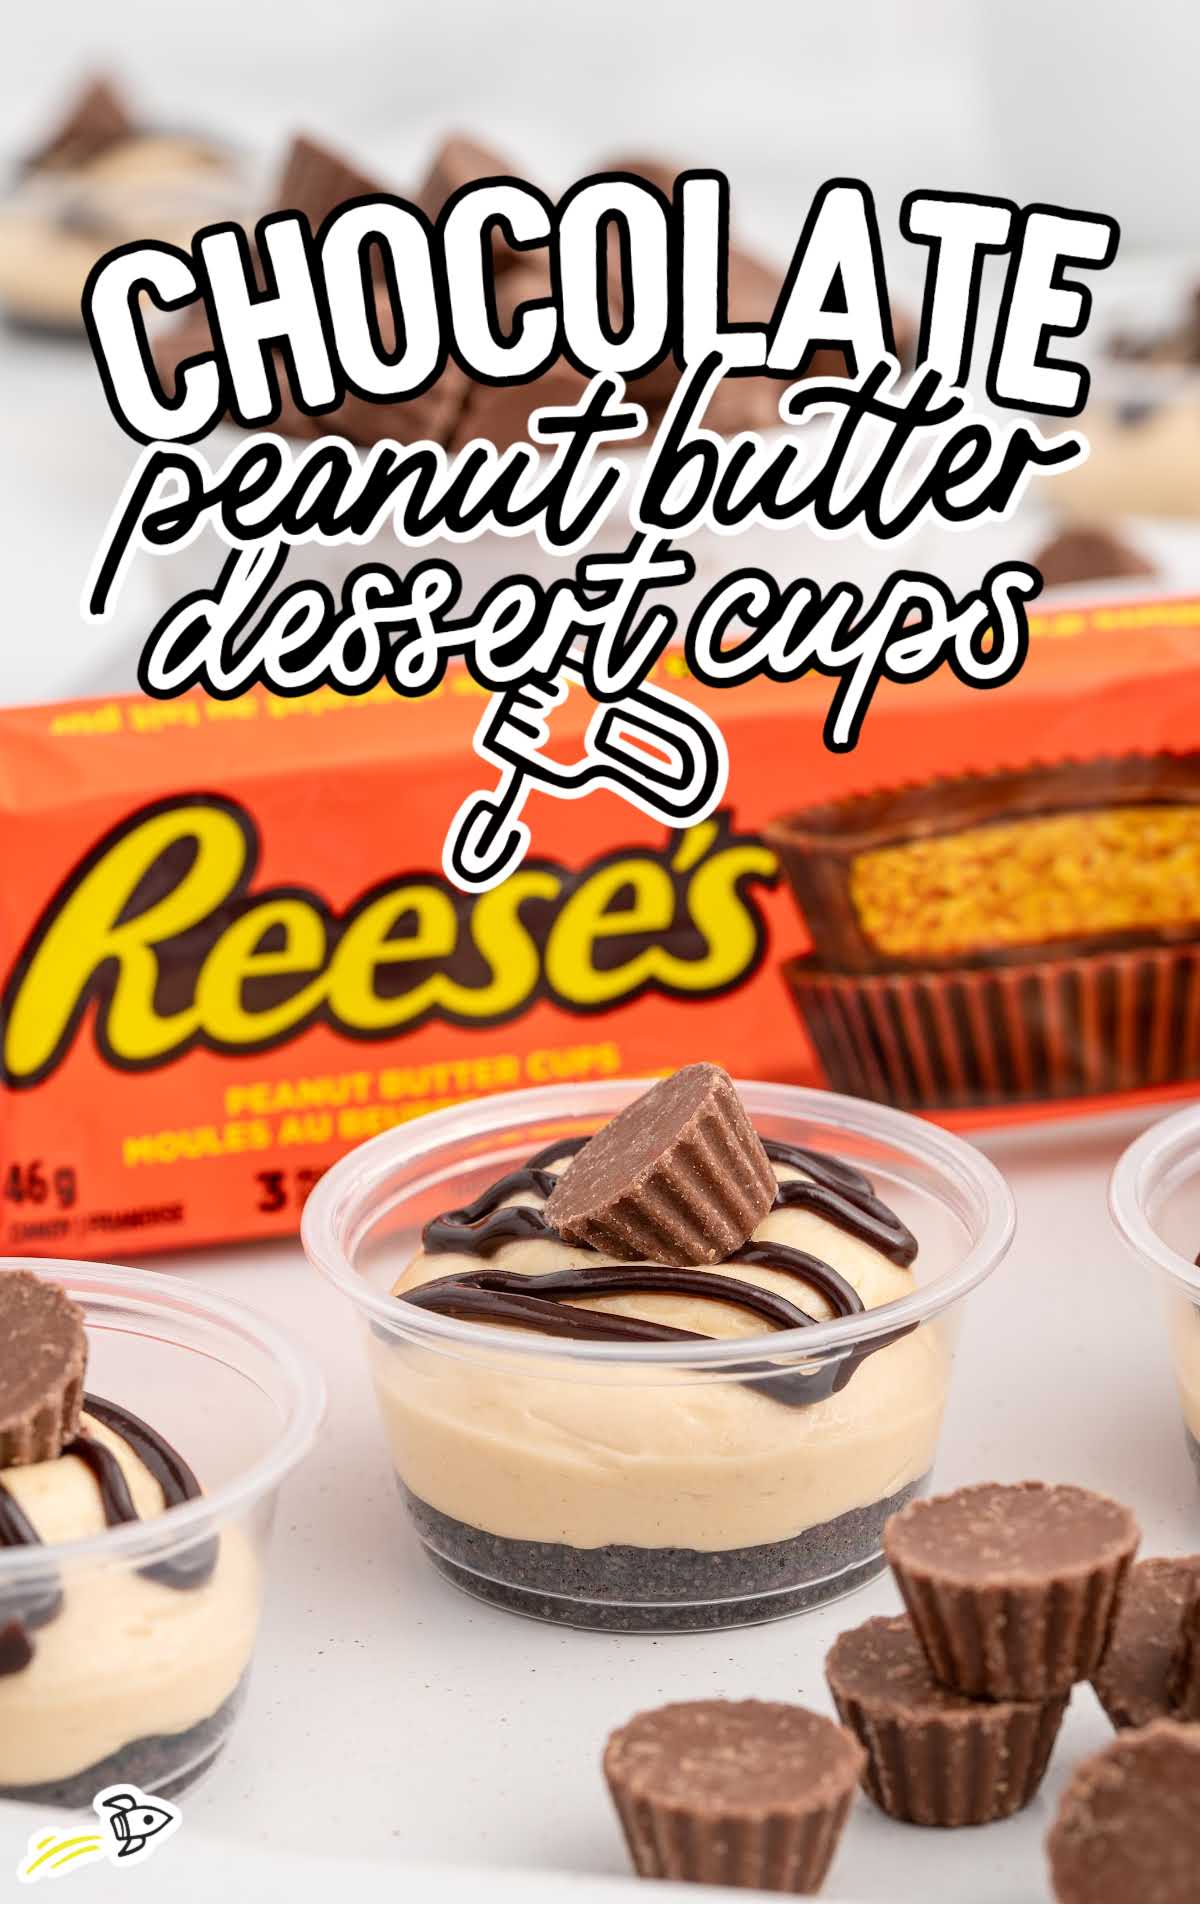 Chocolate Peanut Butter Dessert Cups - Spaceships and Laser Beams